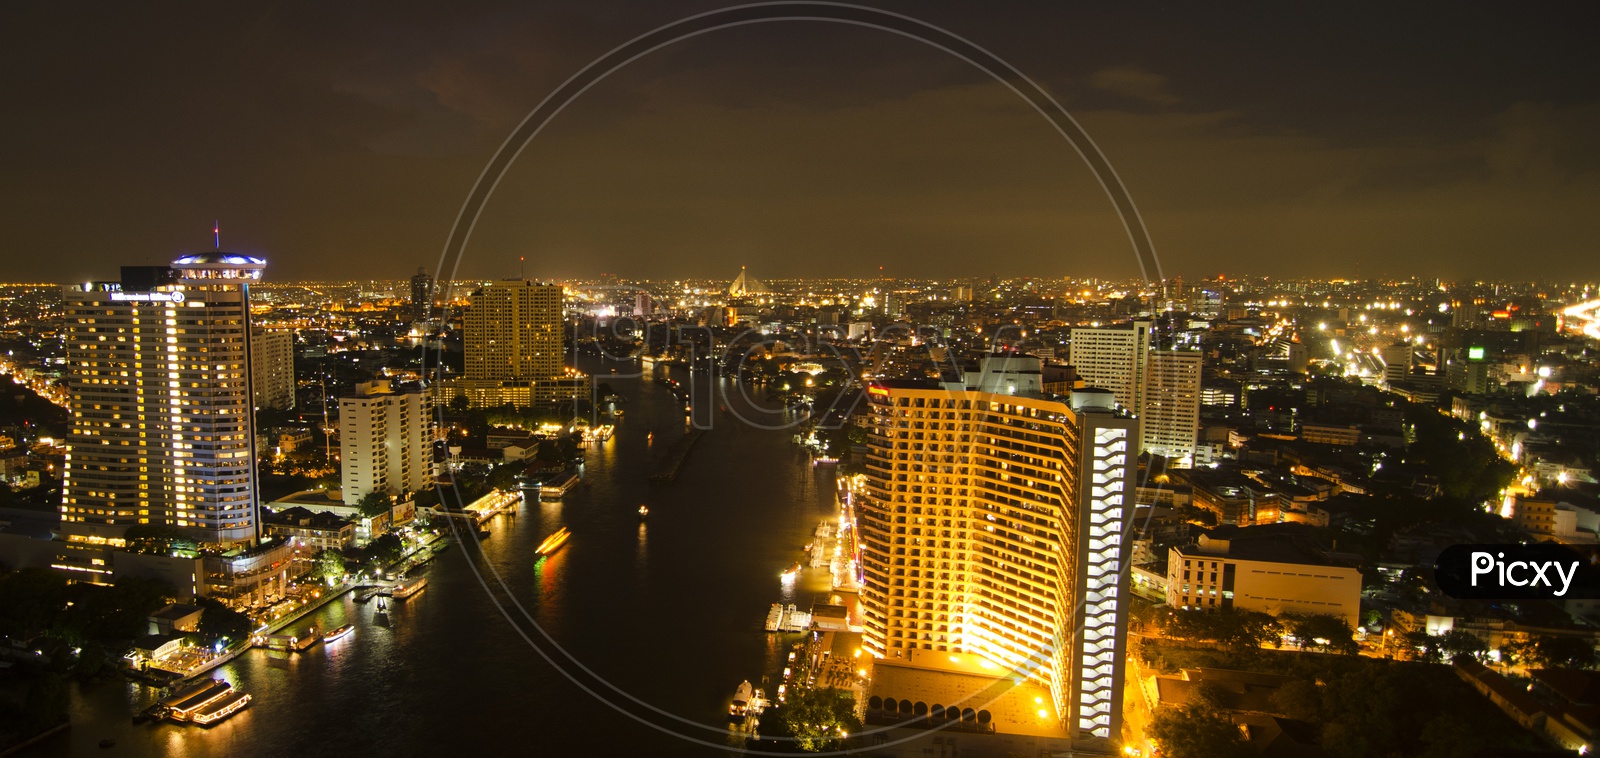 Night Scape Of Bangkok City With High Rise Buildings